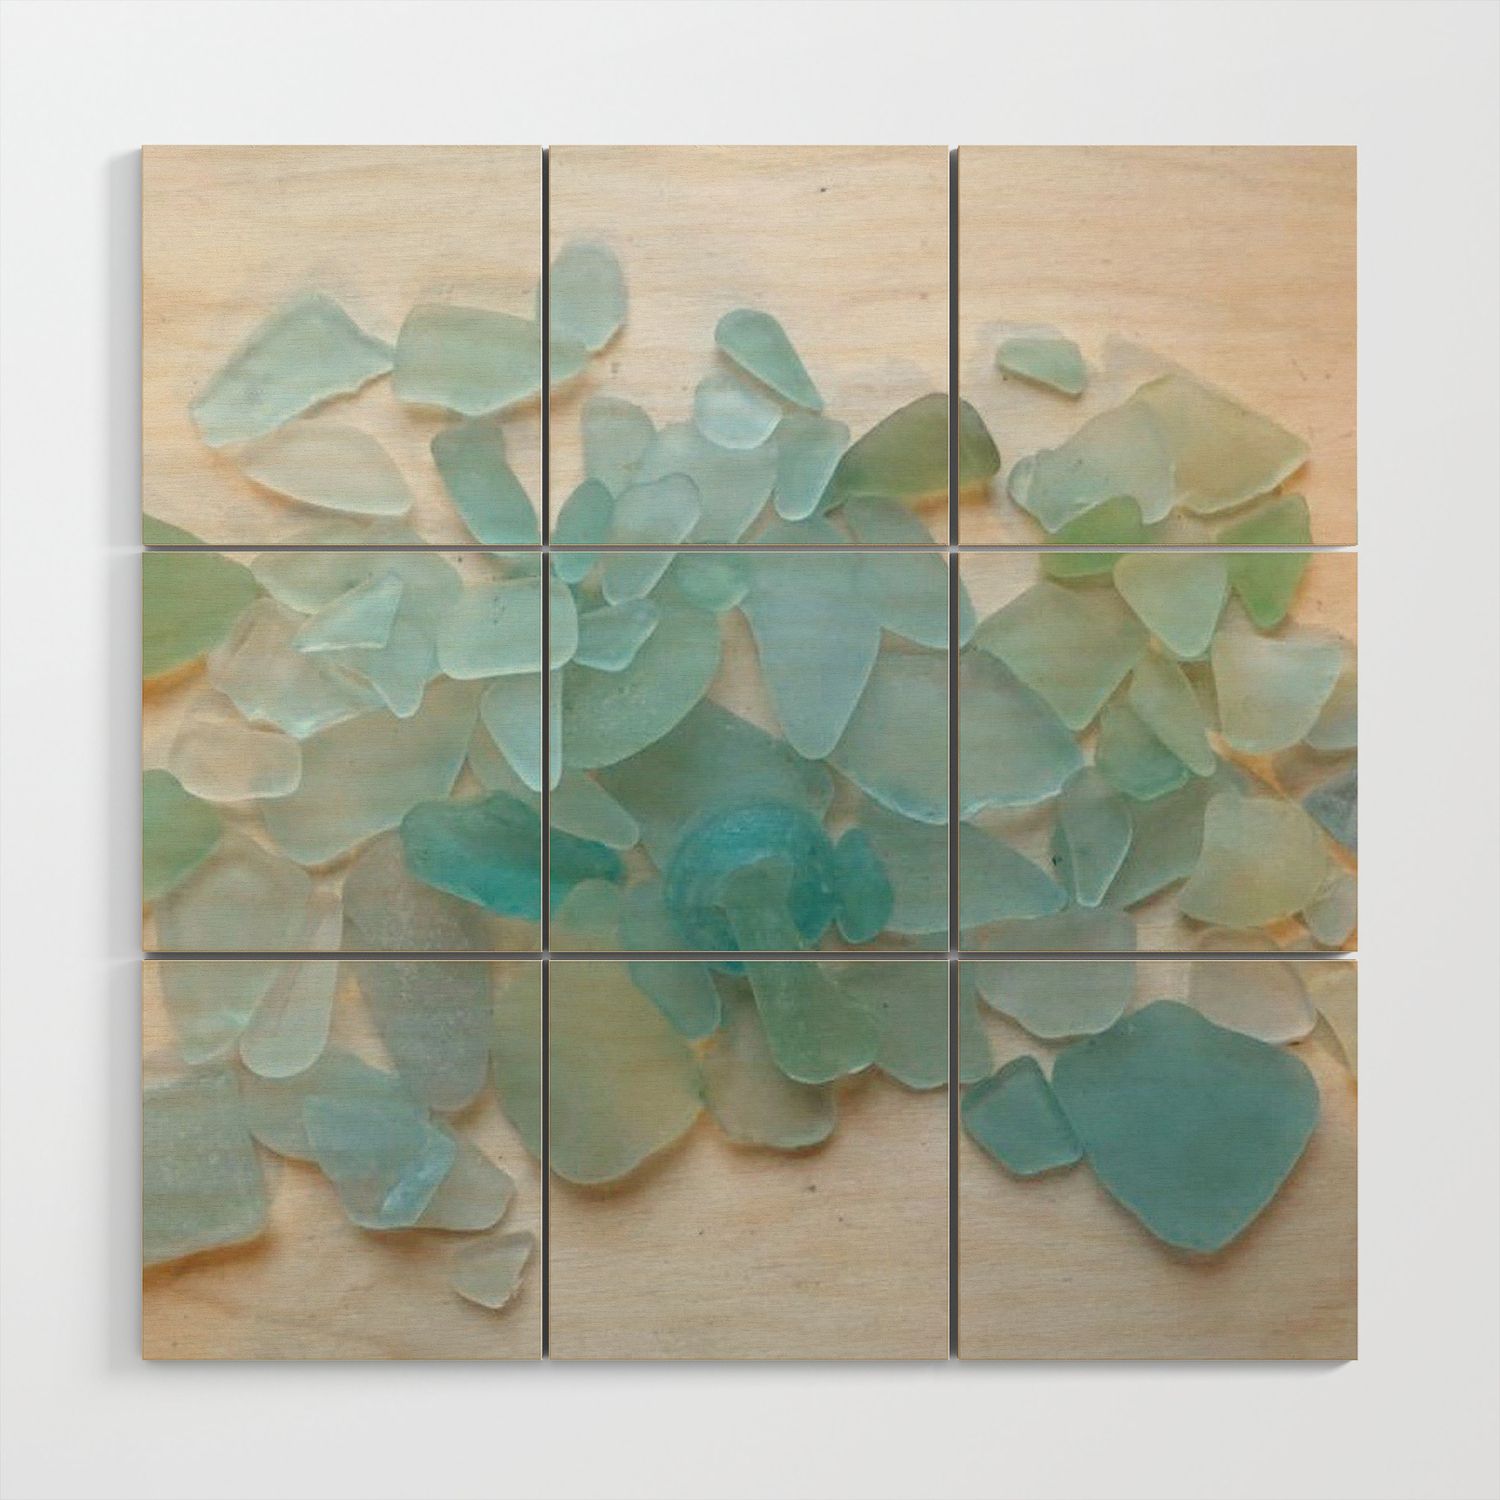 Ocean Hue Sea Glass Wood Wall Artcoastal Whims | Society6 Intended For Newest Ocean Hue Wall Art (View 3 of 20)